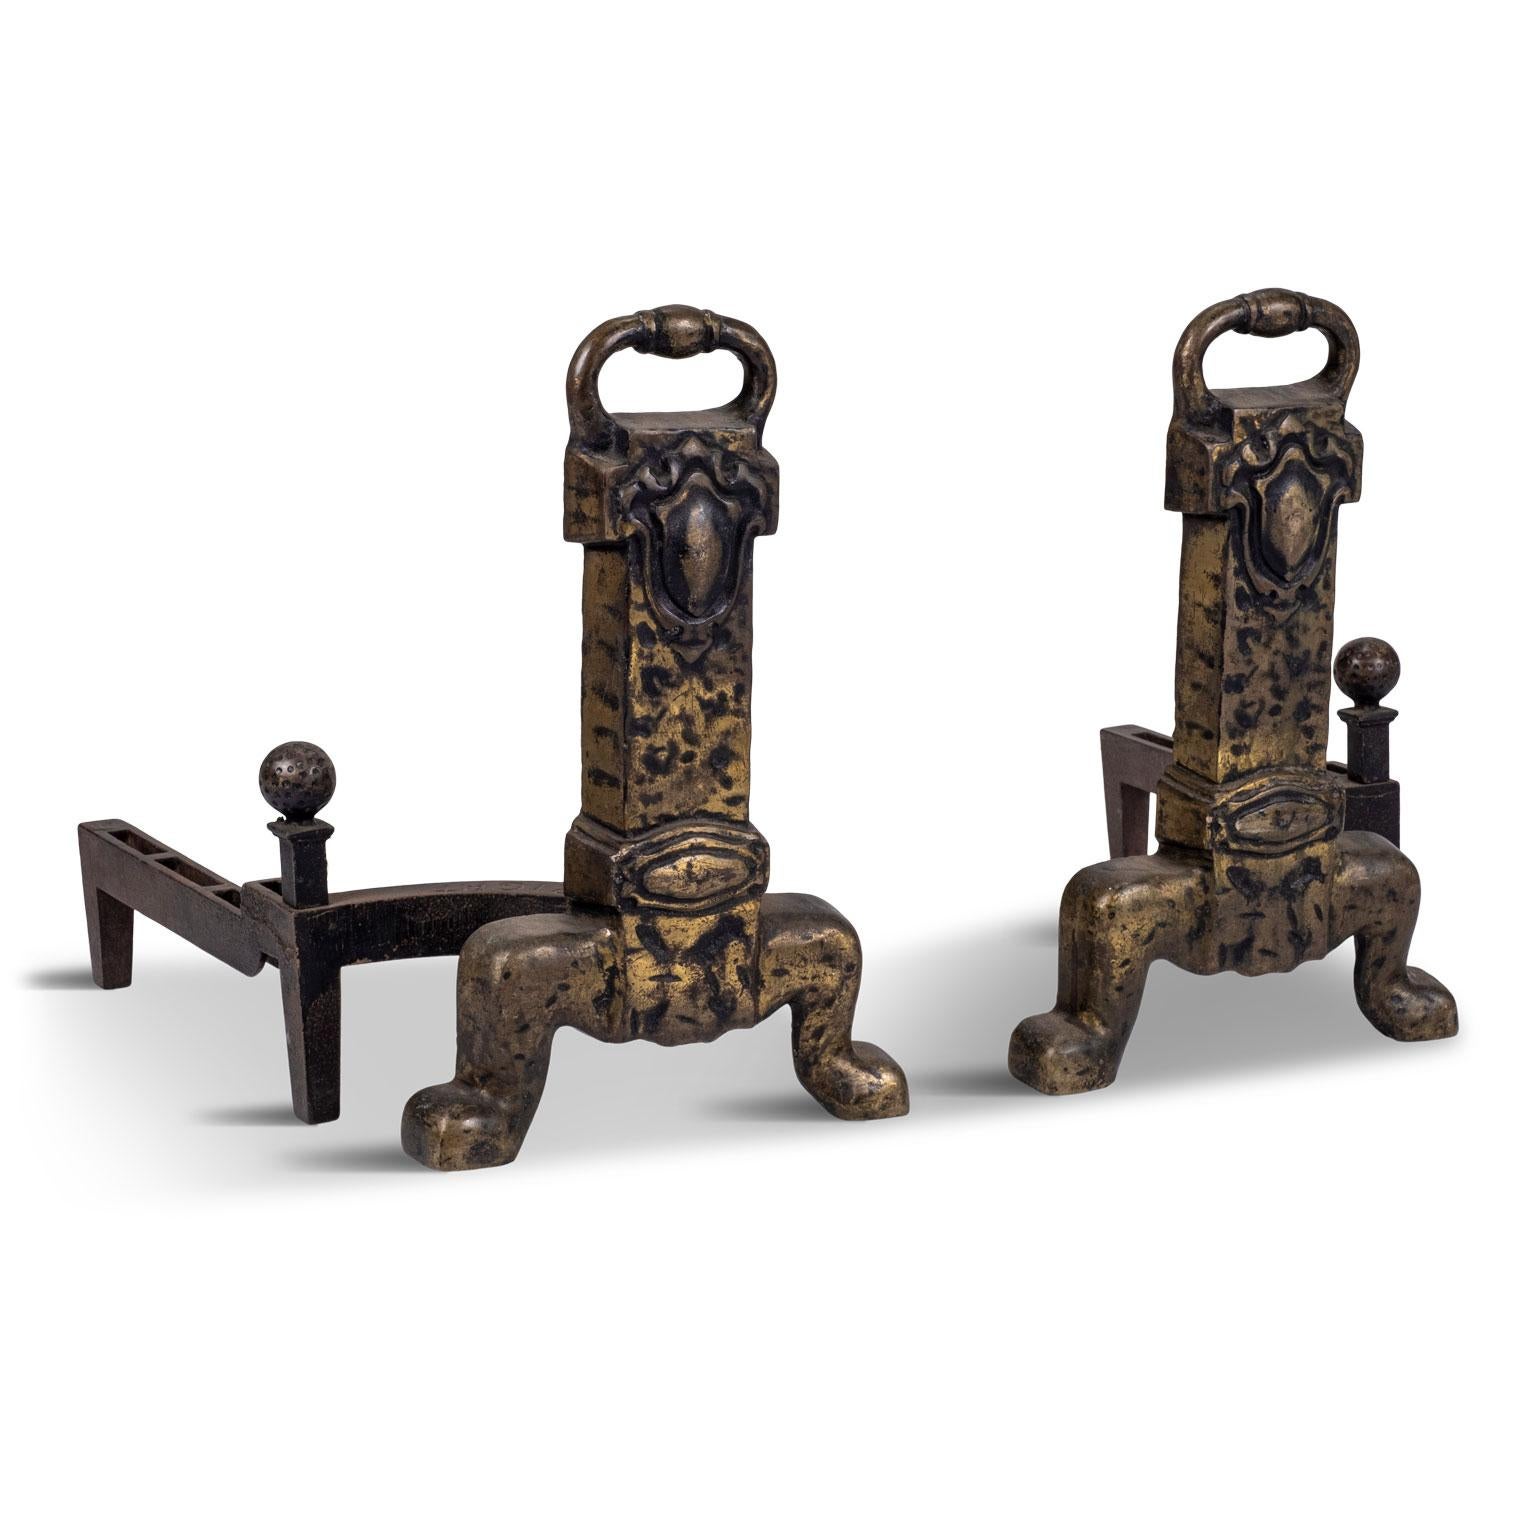 Heavy bronze antique andirons cast by the Adams Company circa 1930s in the USA. Solid and expertly made with cast iron rear portions. Sold together and priced $1,800 for the pair.